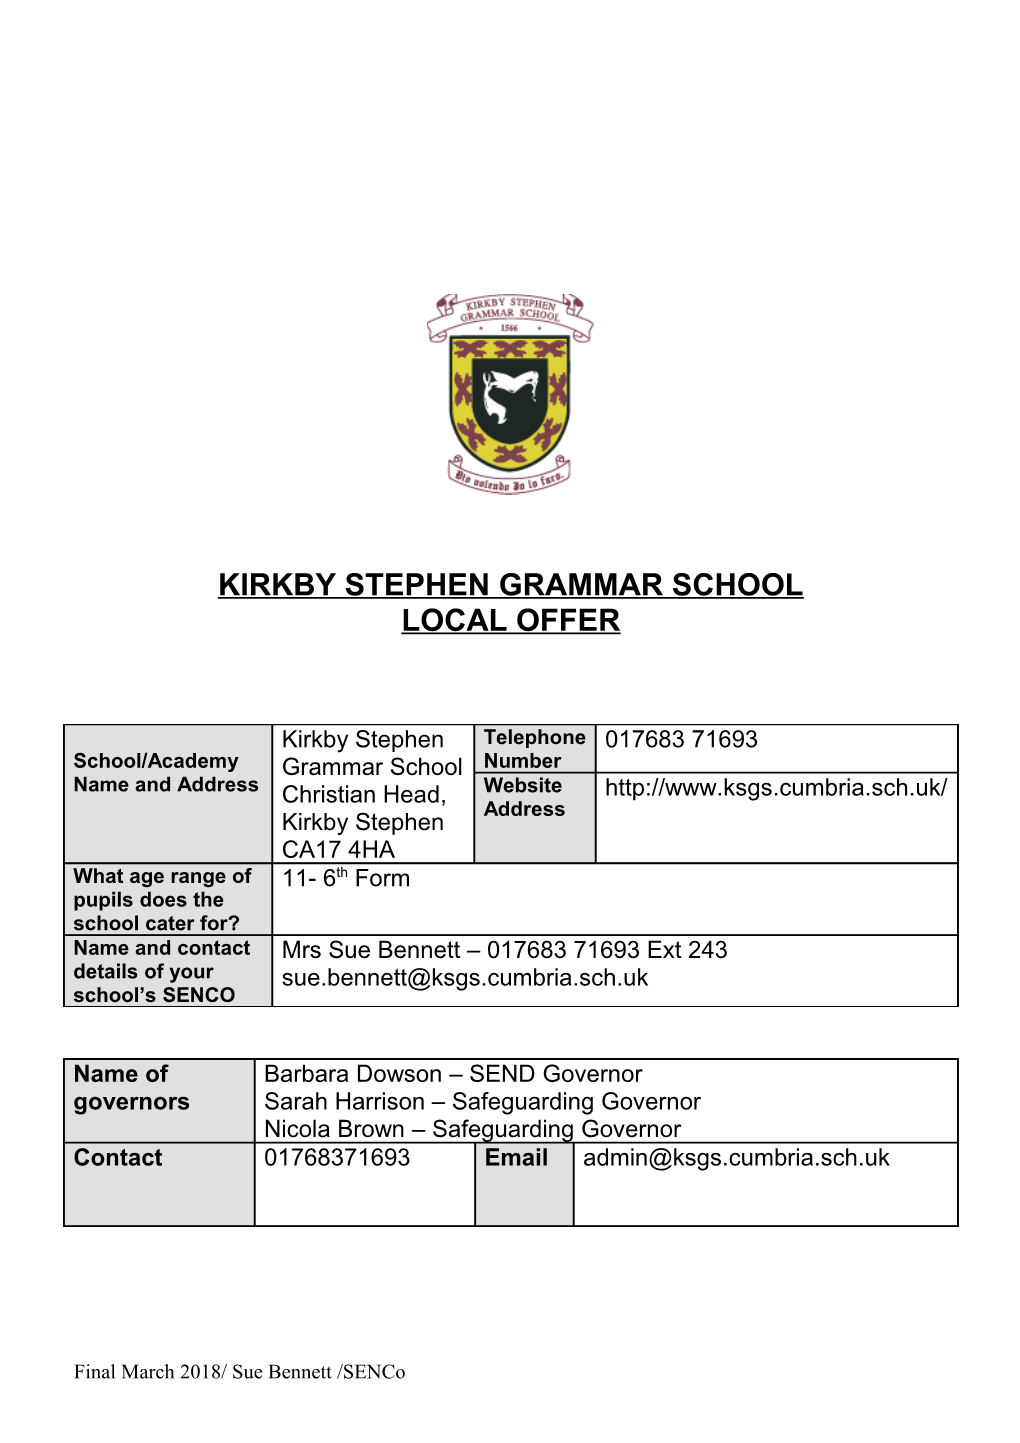 Local Offer: Template for Schools